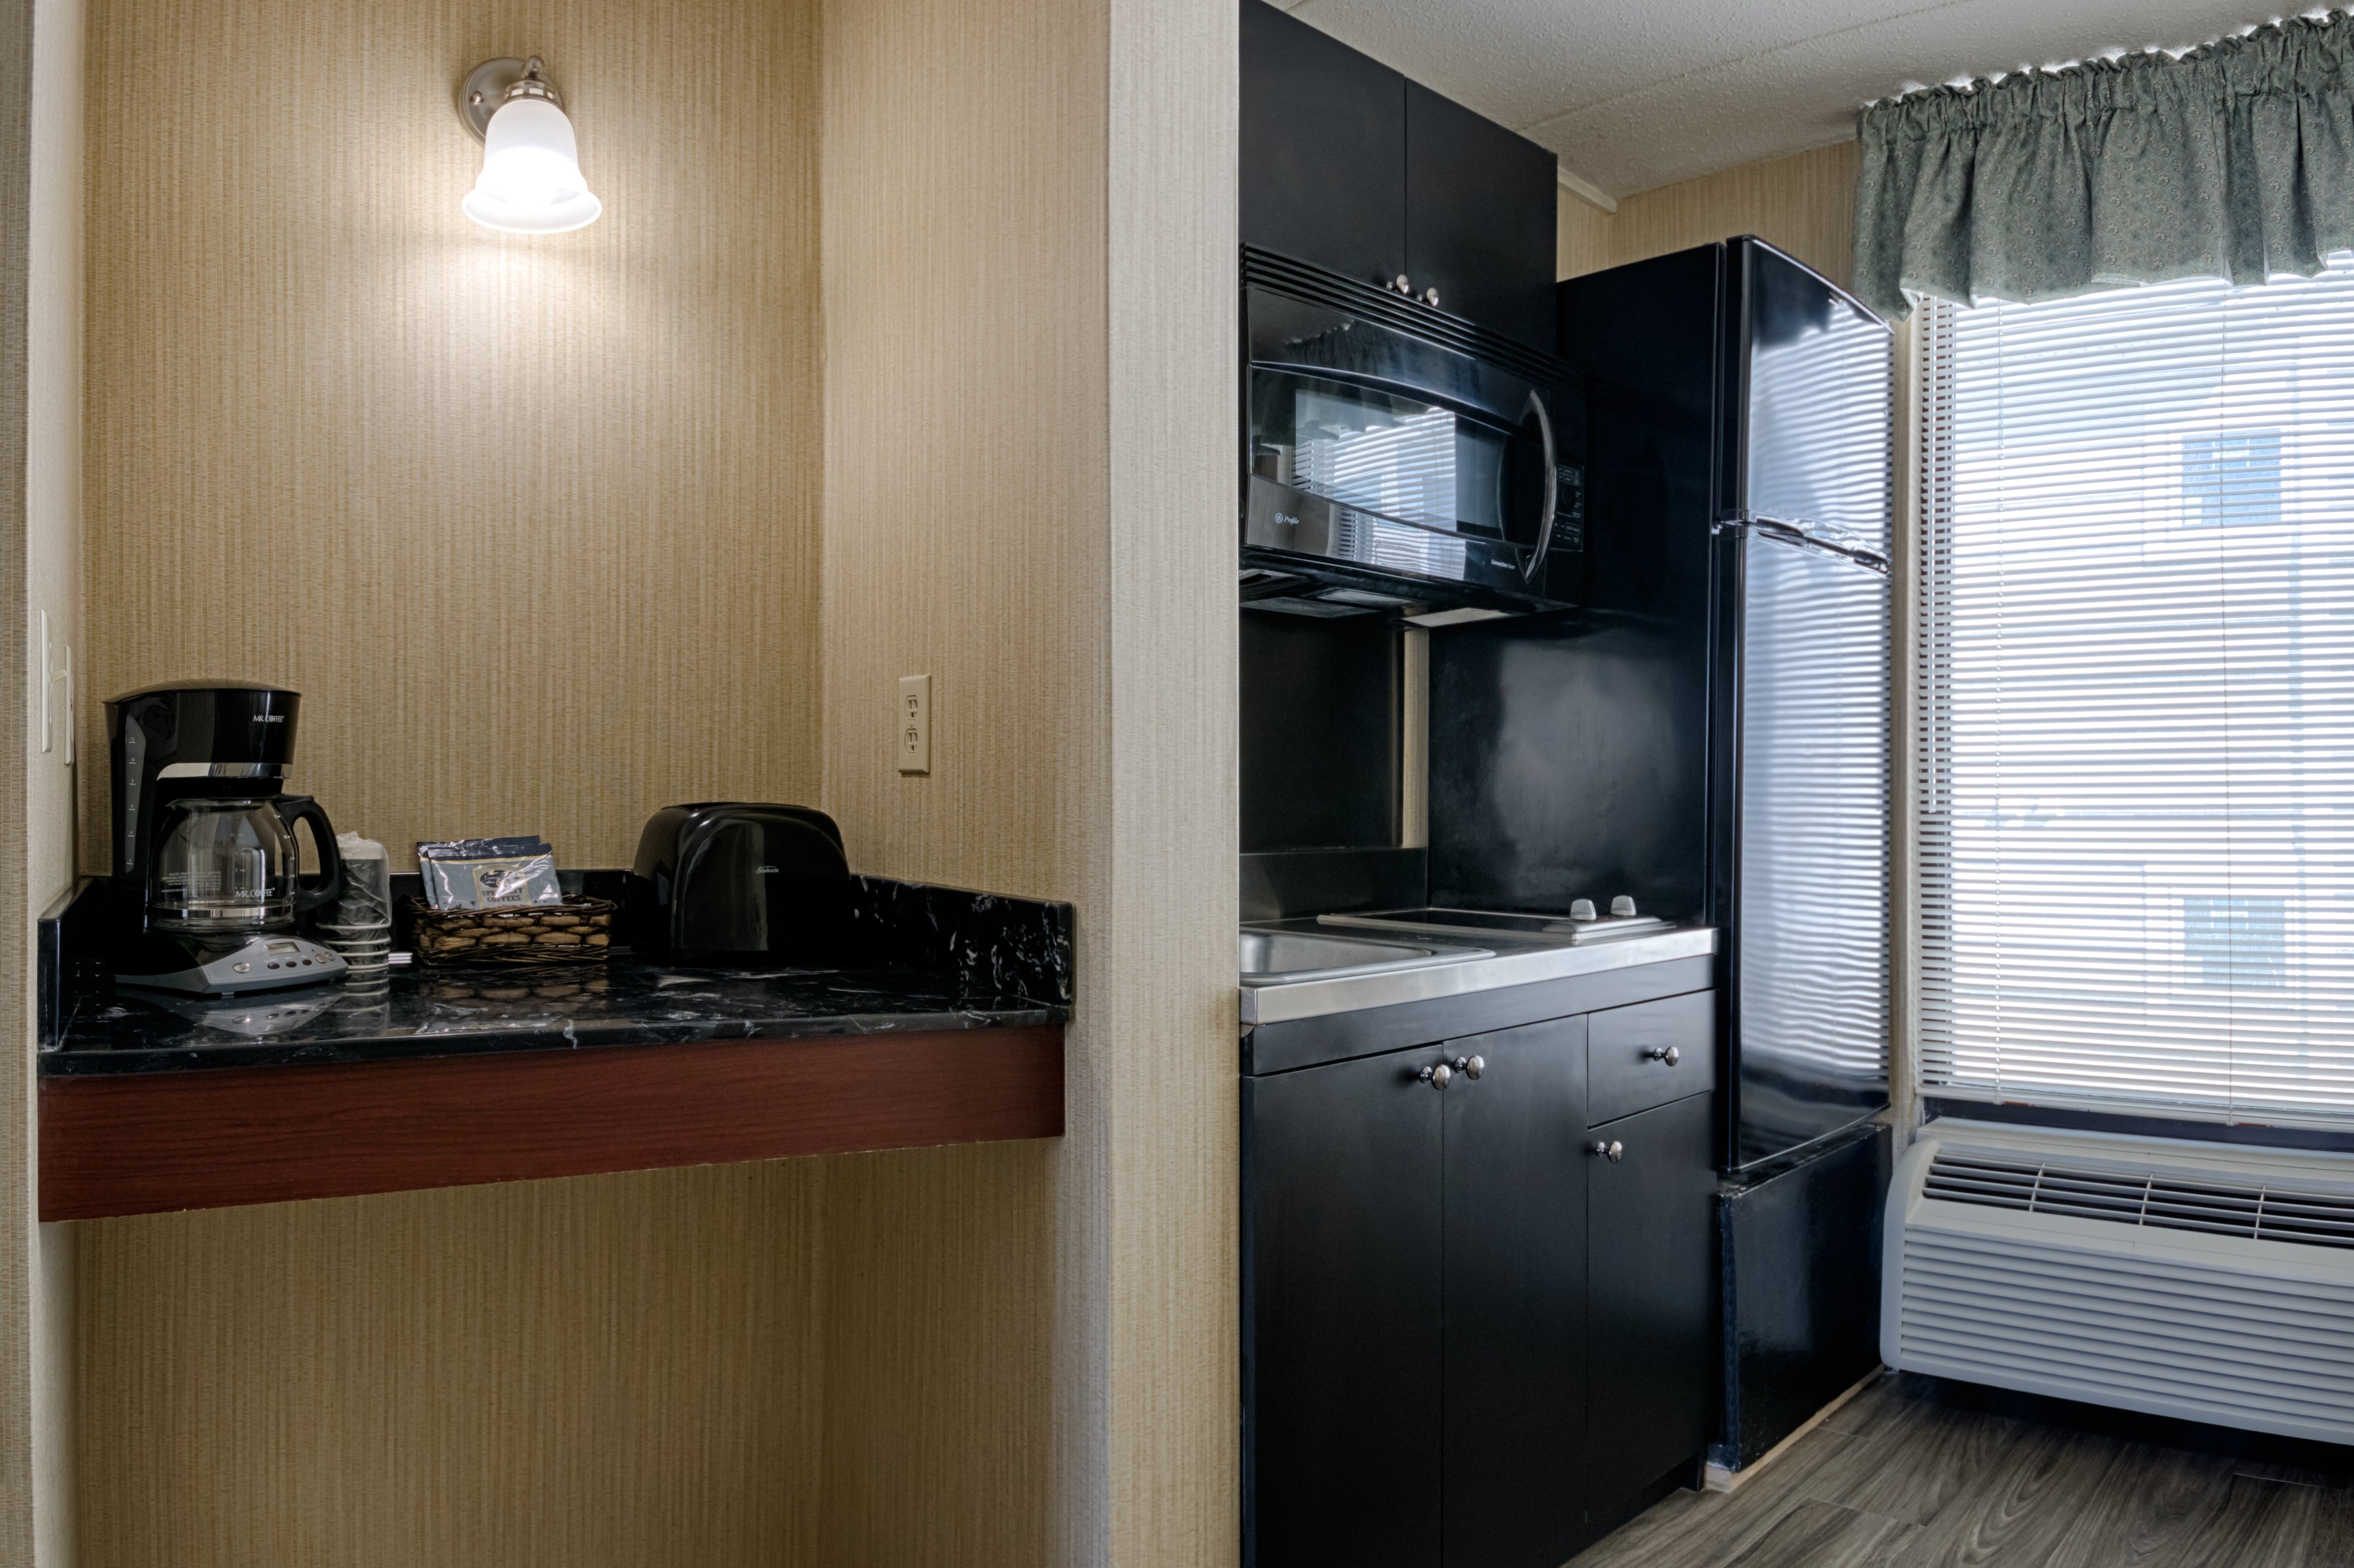 A coffee maker, microwave, cabinets and fridge in the Barefoot Mailman rooms.